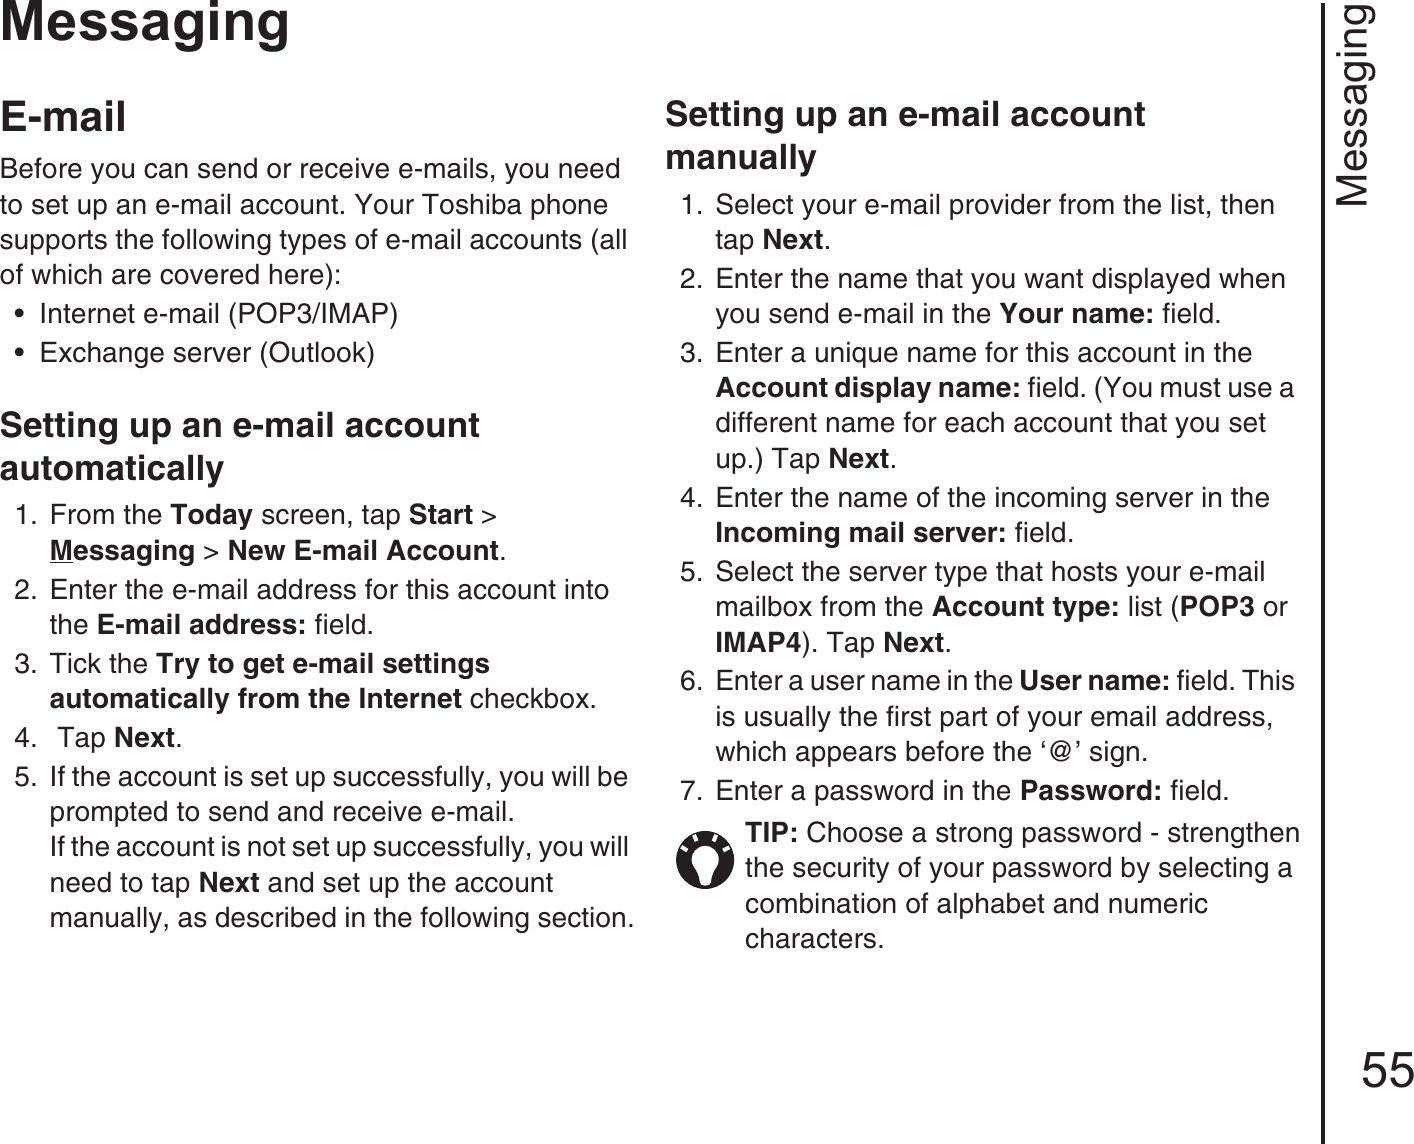 Messaging55MessagingE-mail Before you can send or receive e-mails, you need to set up an e-mail account. Your Toshiba phone supports the following types of e-mail accounts (all of which are covered here): • Internet e-mail (POP3/IMAP) • Exchange server (Outlook)Setting up an e-mail account automatically1.  From the Today screen, tap Start &gt; Messaging &gt; New E-mail Account.2.  Enter the e-mail address for this account into the E-mail address: field.3.  Tick the Try to get e-mail settings automatically from the Internet checkbox.4.   Tap Next. 5.  If the account is set up successfully, you will be prompted to send and receive e-mail. If the account is not set up successfully, you will need to tap Next and set up the account manually, as described in the following section.Setting up an e-mail account manually1.  Select your e-mail provider from the list, then tap Next.2.  Enter the name that you want displayed when you send e-mail in the Your name: field.3.  Enter a unique name for this account in the Account display name: field. (You must use a different name for each account that you set up.) Tap Next. 4.  Enter the name of the incoming server in the Incoming mail server: field.5.  Select the server type that hosts your e-mail mailbox from the Account type: list (POP3 or IMAP4). Tap Next.6.  Enter a user name in the User name: field. This is usually the first part of your email address, which appears before the ‘@’ sign.7.  Enter a password in the Password: field. TIP: Choose a strong password - strengthen the security of your password by selecting a combination of alphabet and numeric characters.